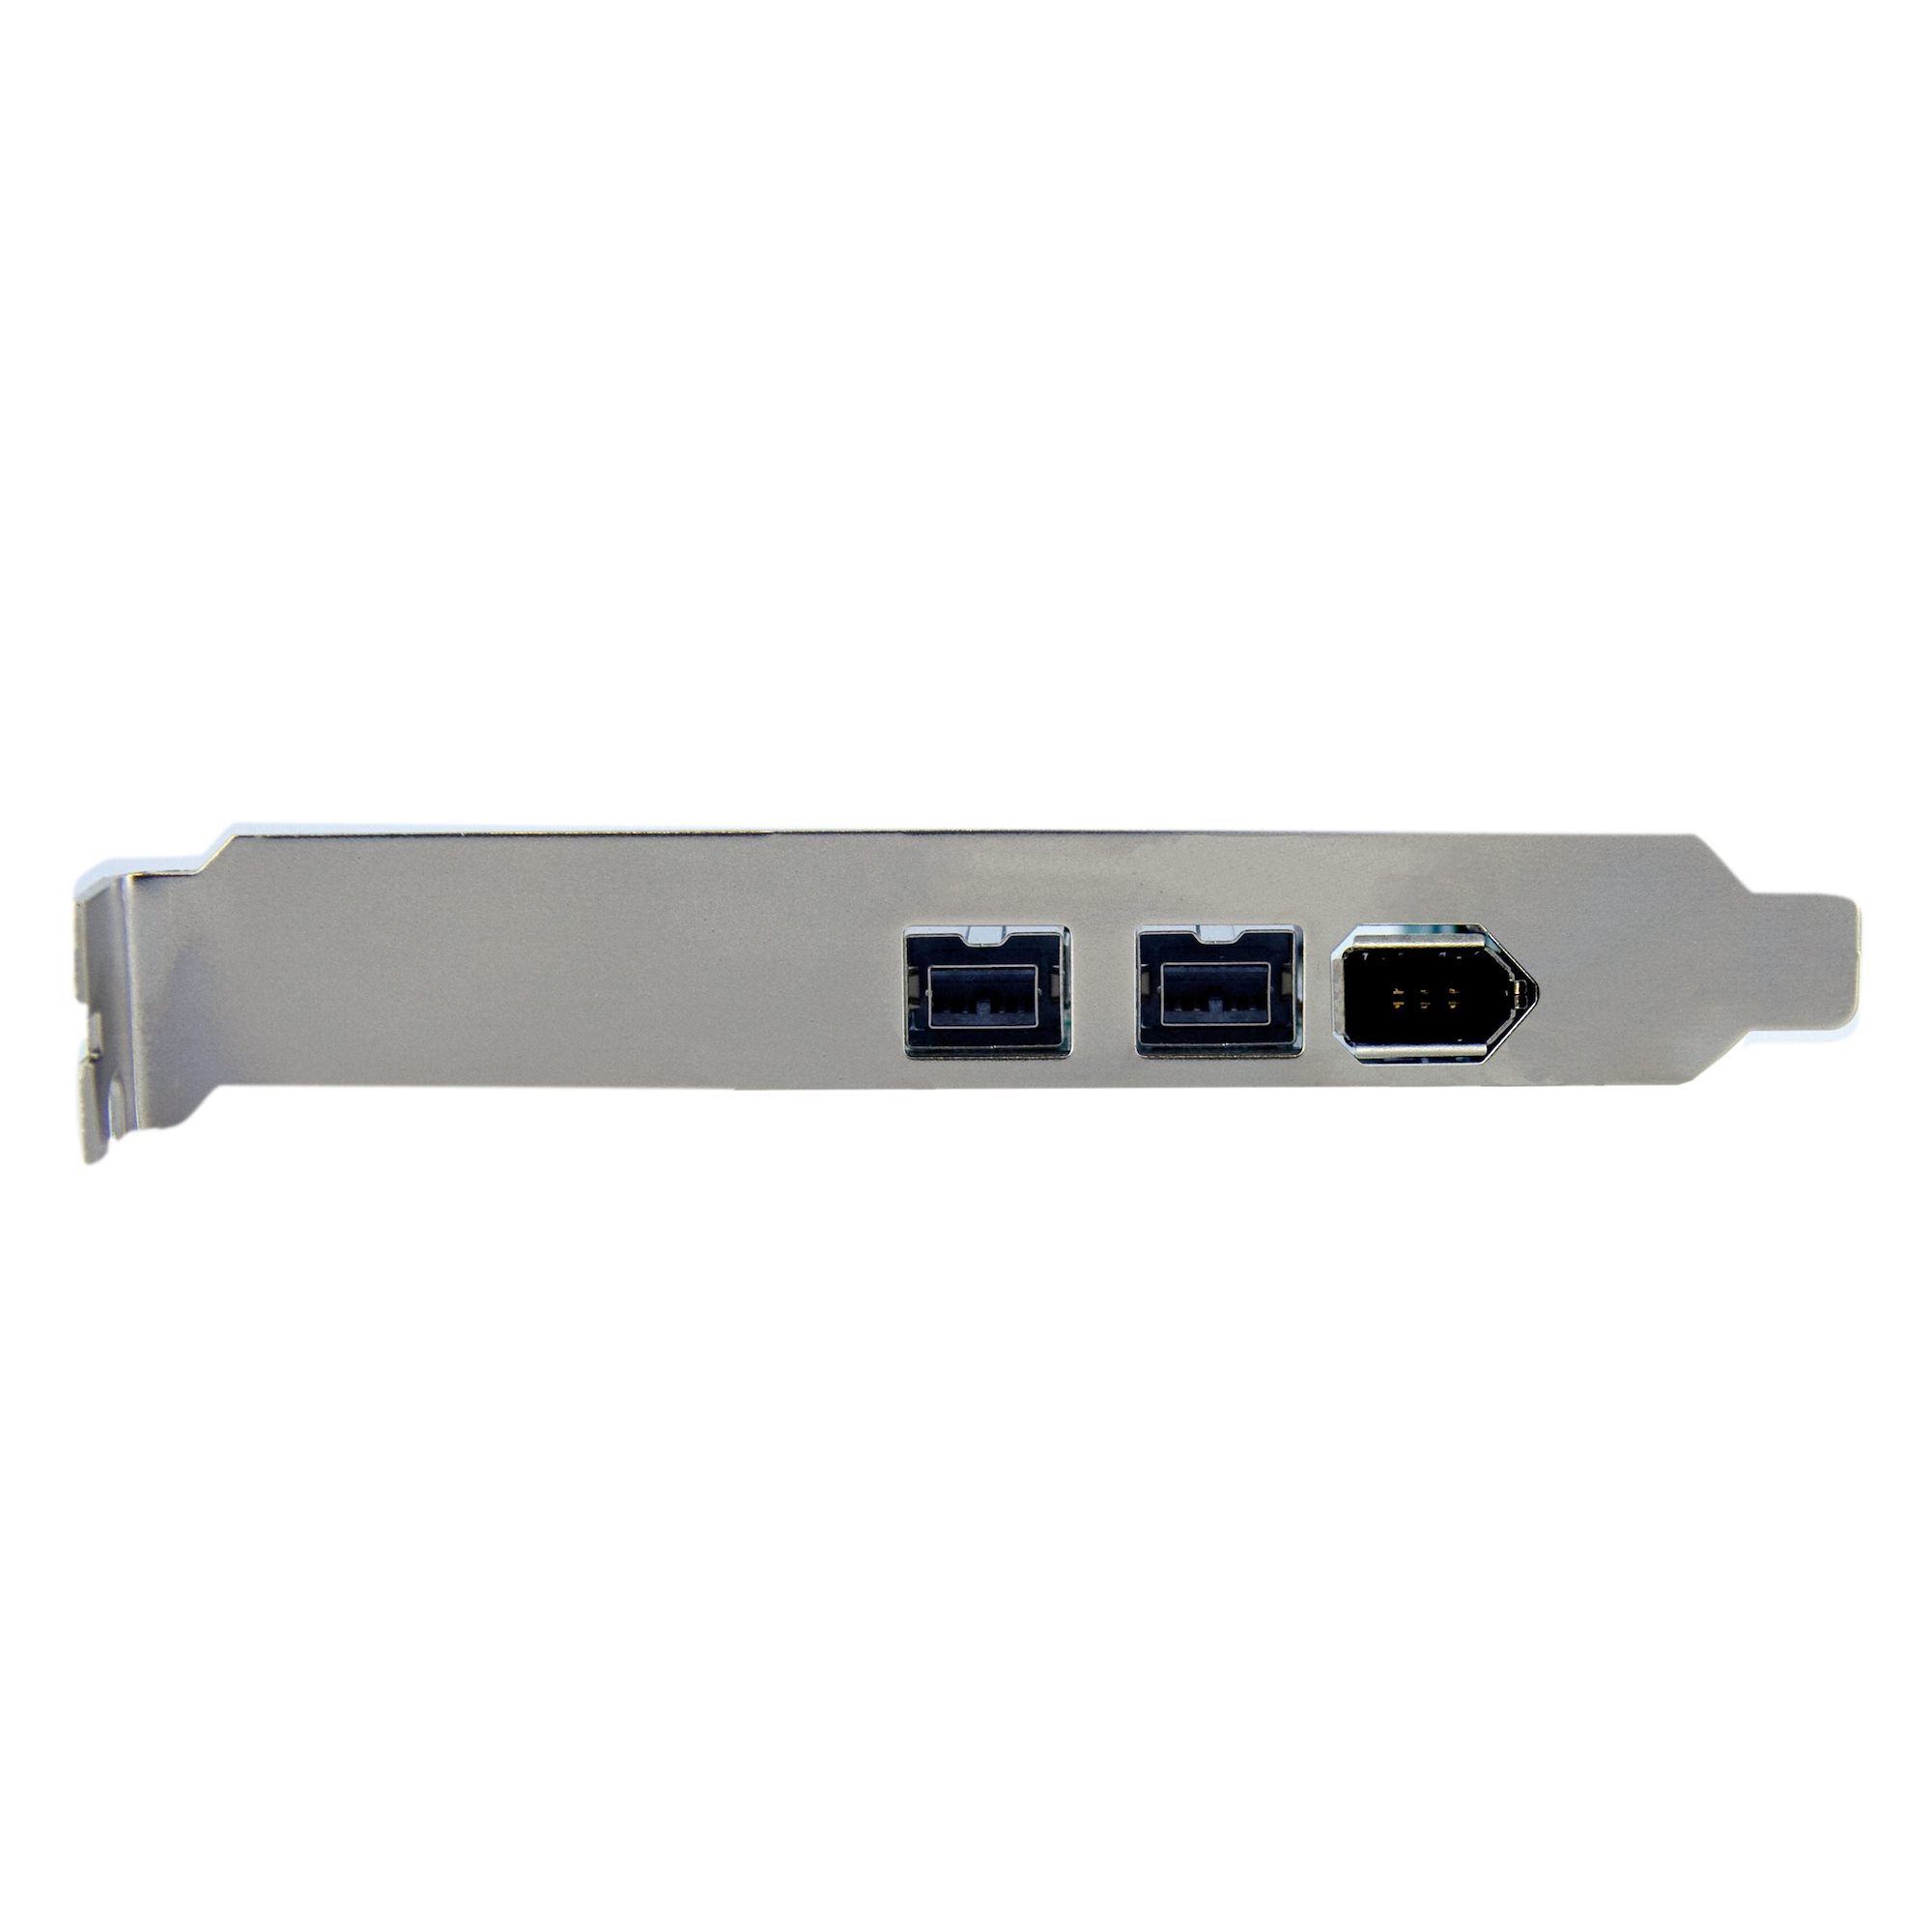 3 ports adaptateur Sedna  2 x 6 broches + 1 x 4 broches externe, 1 x 6 broches Interne  PCI 1394  FireWire 